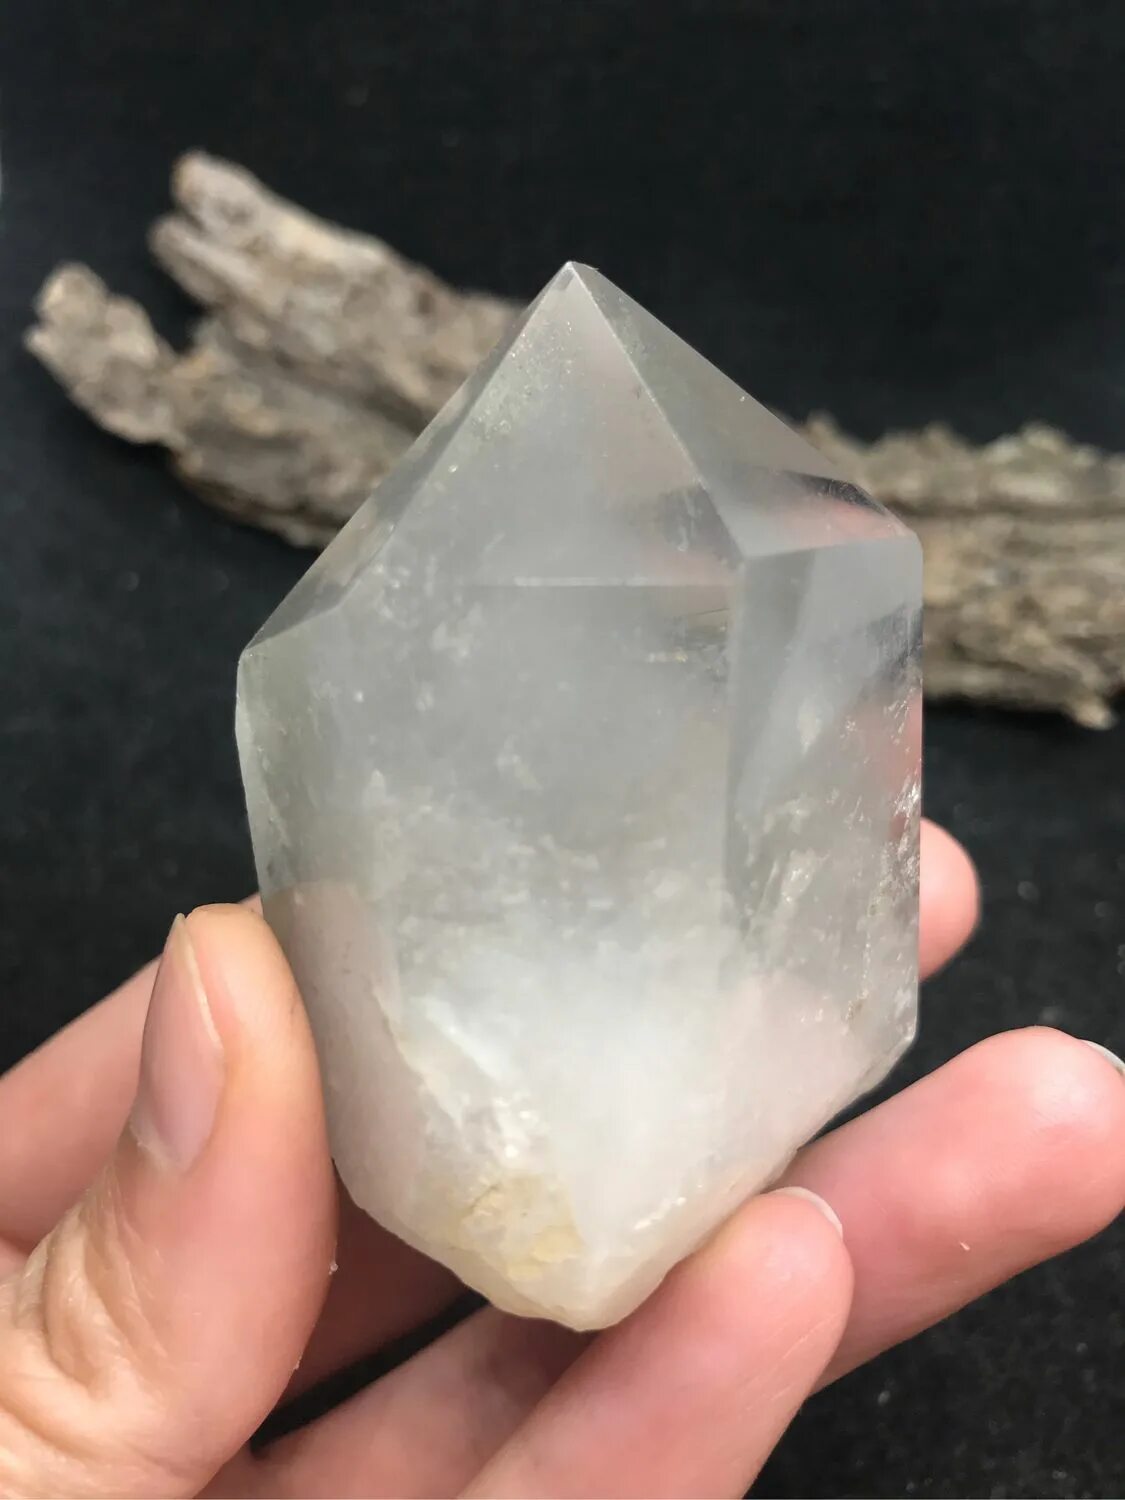 Quartz crystal. Кристалл кварца. Кристалл (кварц) r131. Монокристалл кварца. Монокристаллы Алмаз и кварц.